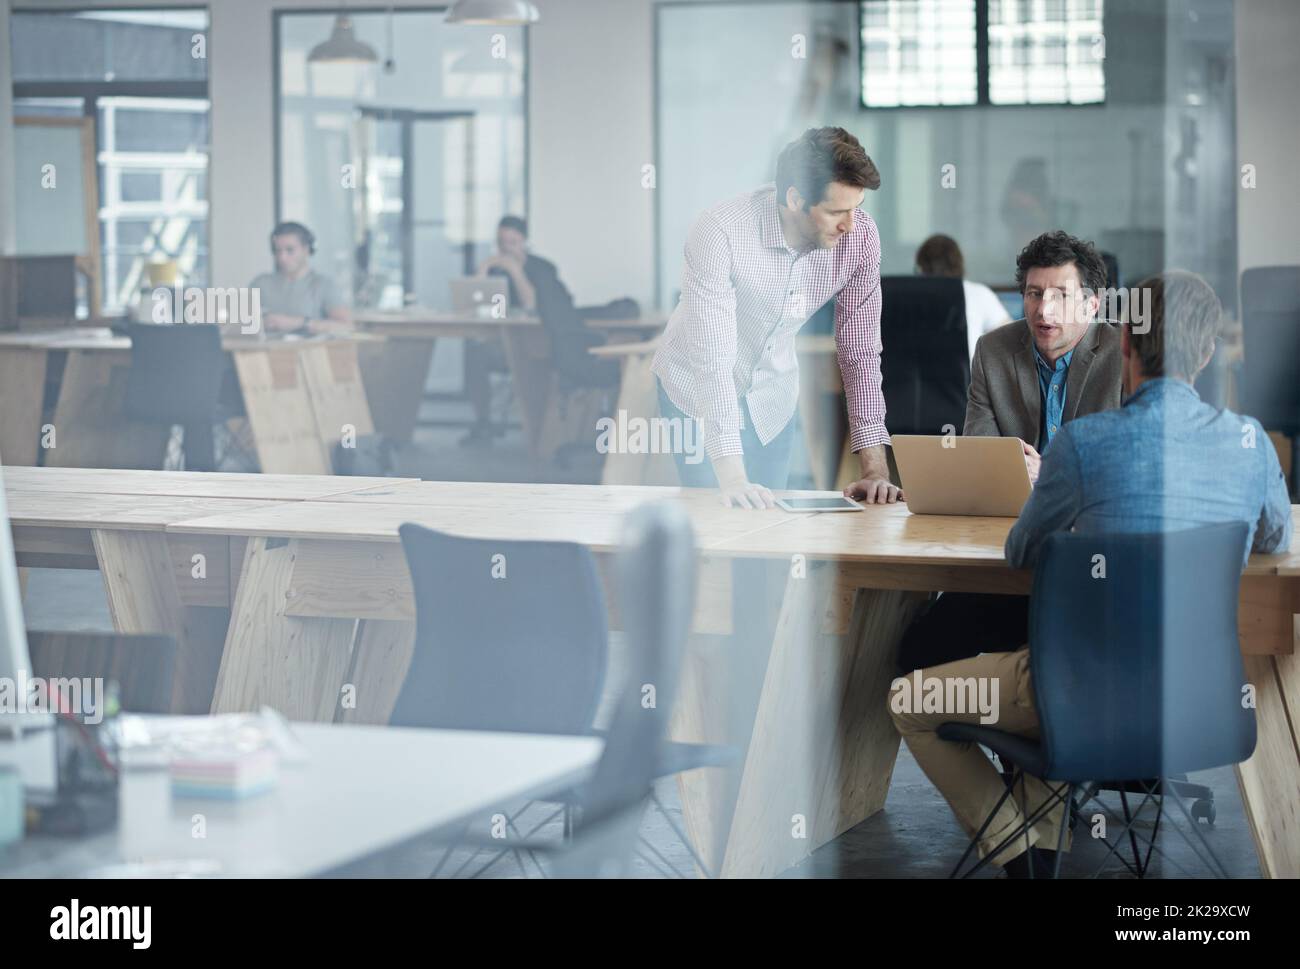 Sharing ideas. Through the glass shot of a group of colleagues working together in an office. Stock Photo